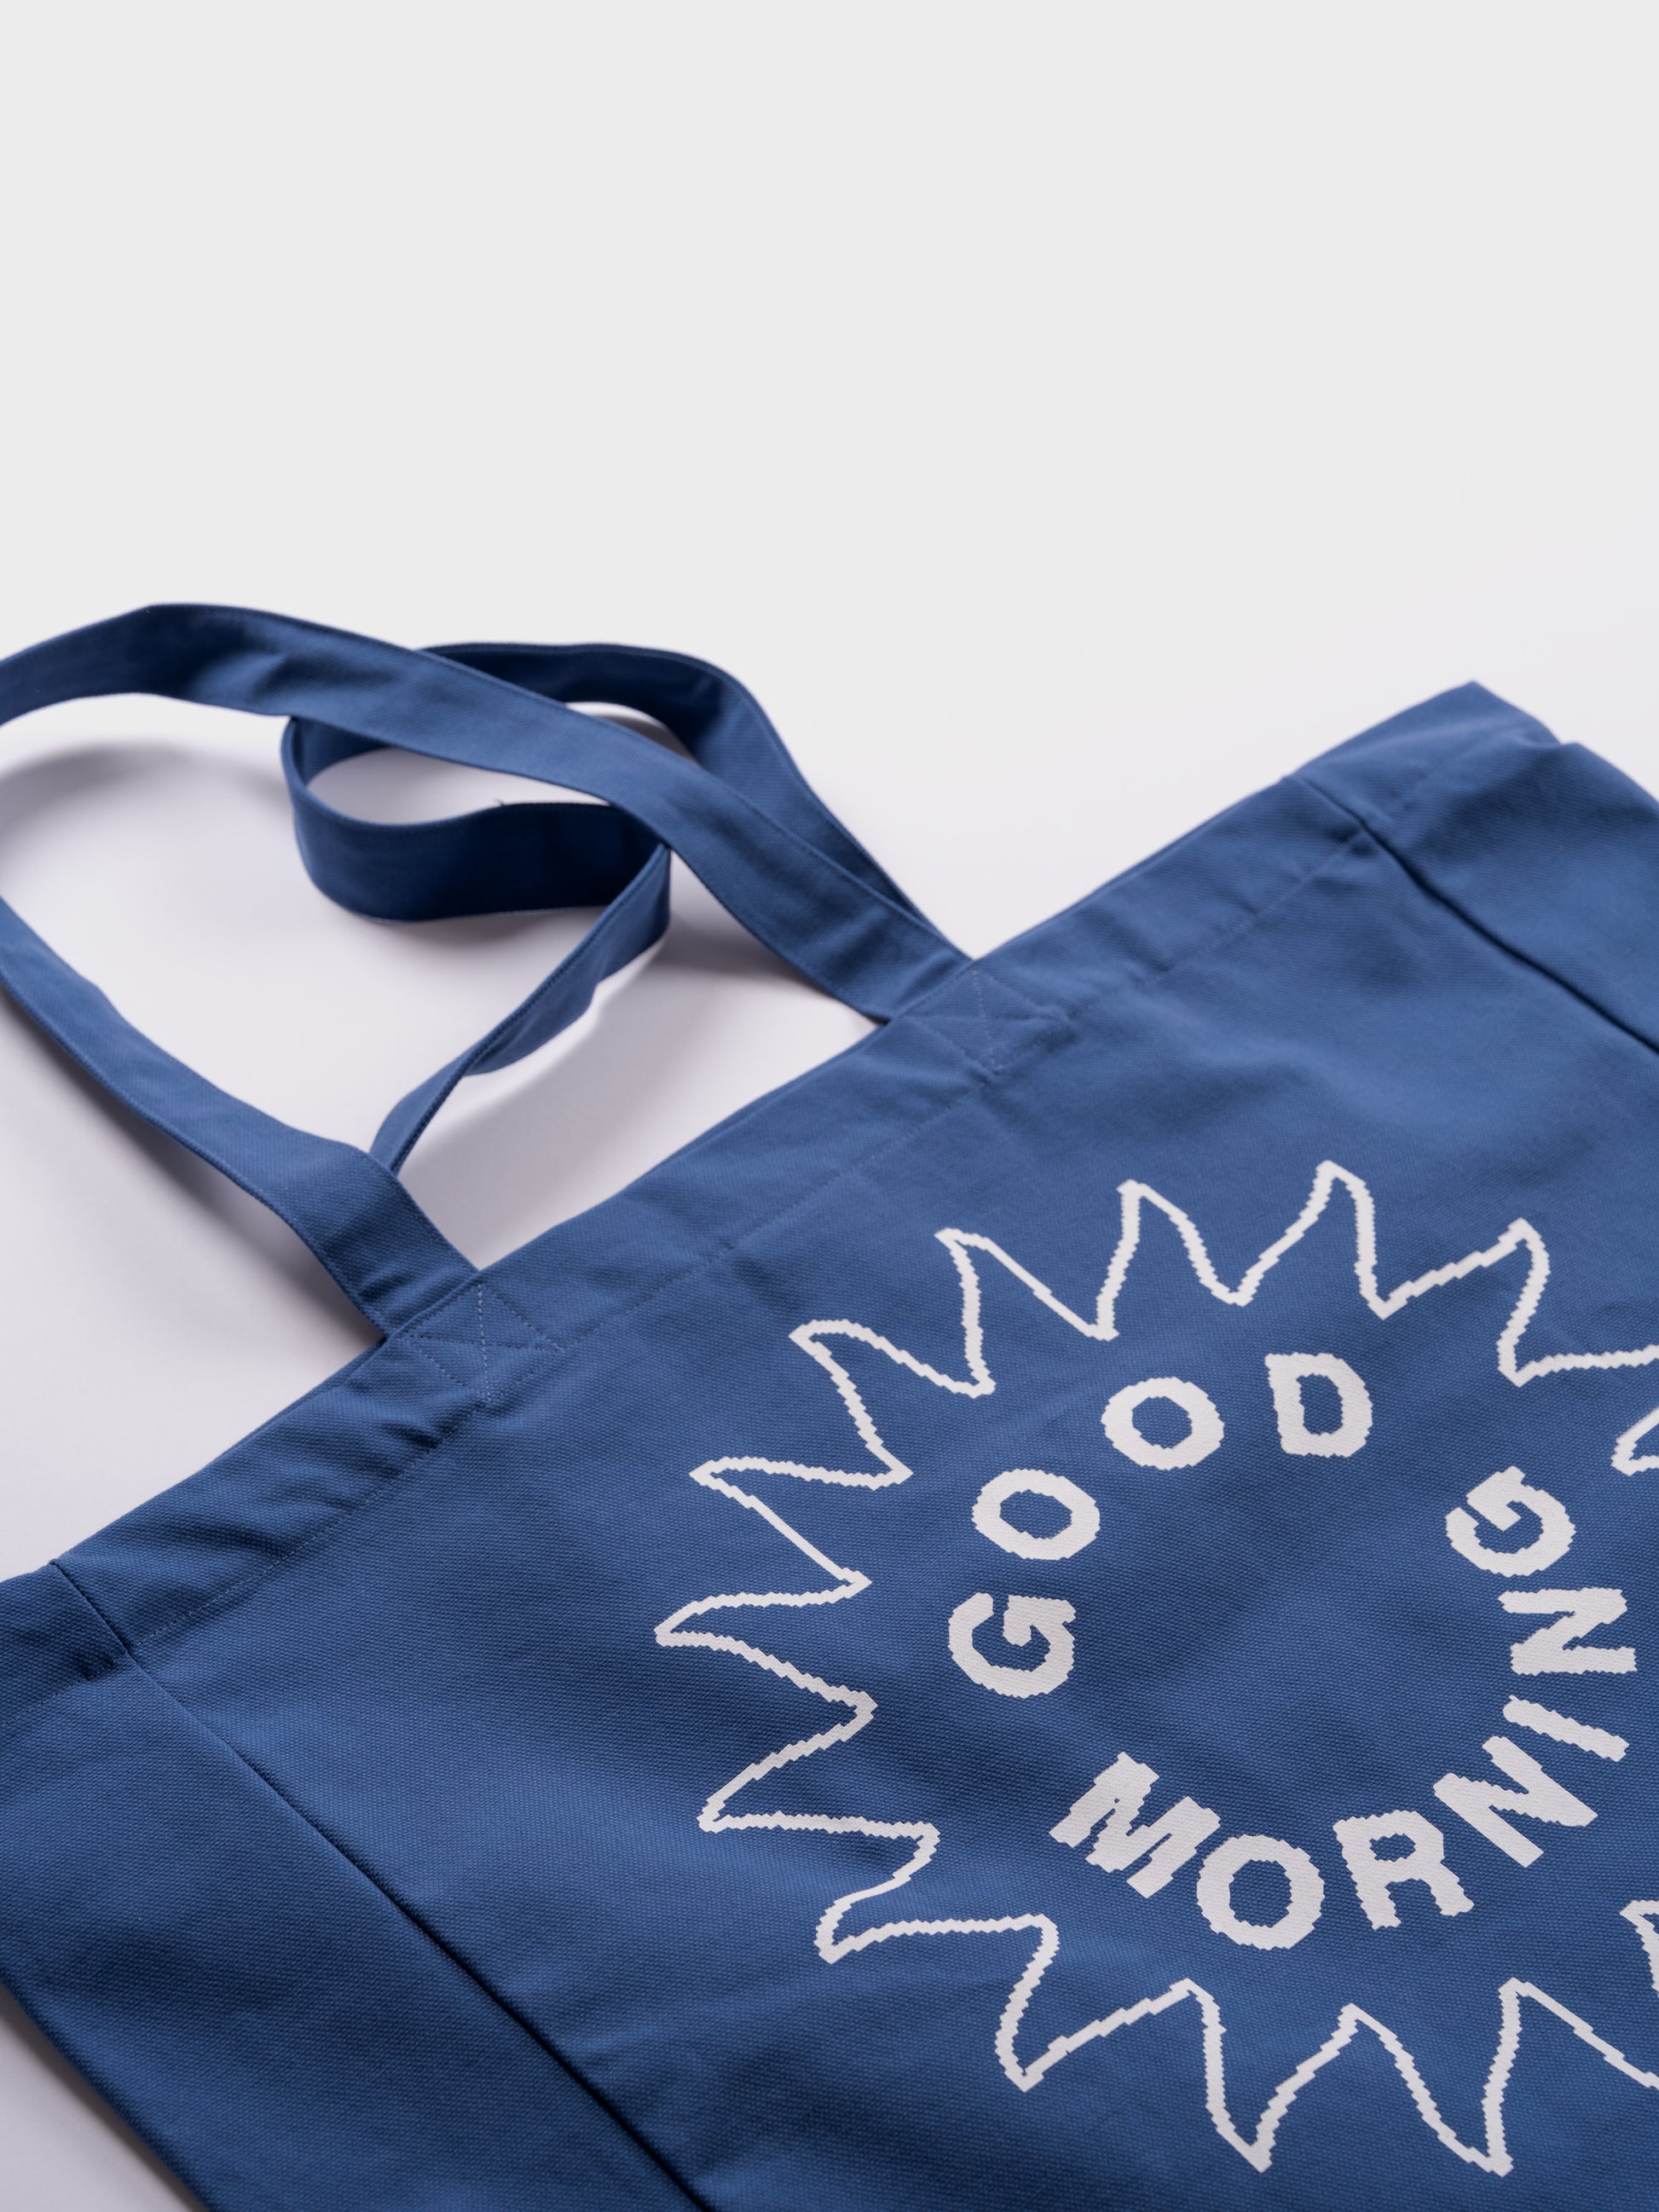 Good Morning Tapes Music to Dream By Tote Bag - Sea